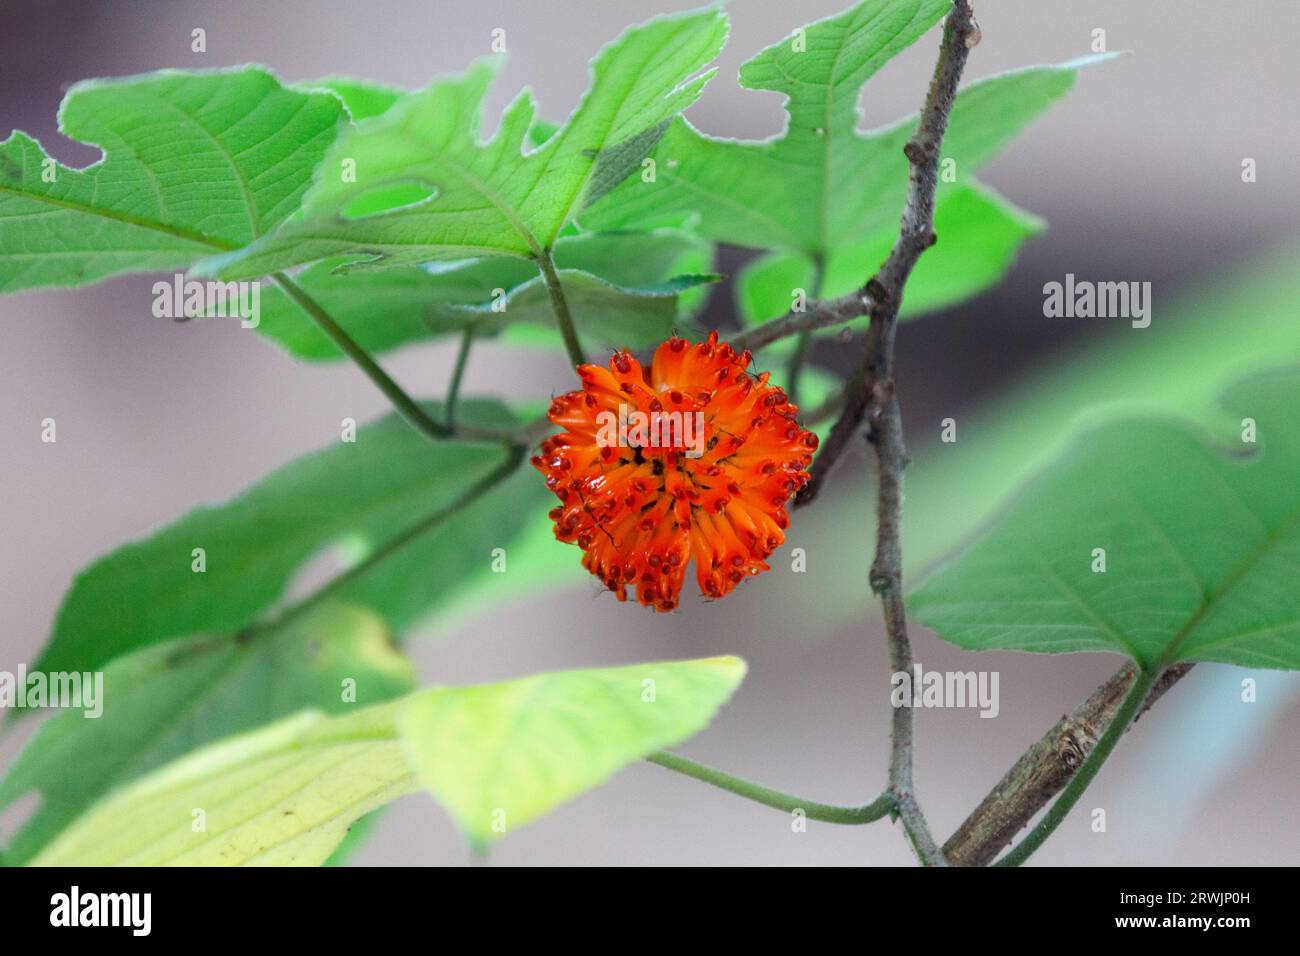 The paper mulberry (Broussonetia papyrifera, syn. Morus papyrifera L.) is a species of flowering plant in the family Moraceae. Stock Photo